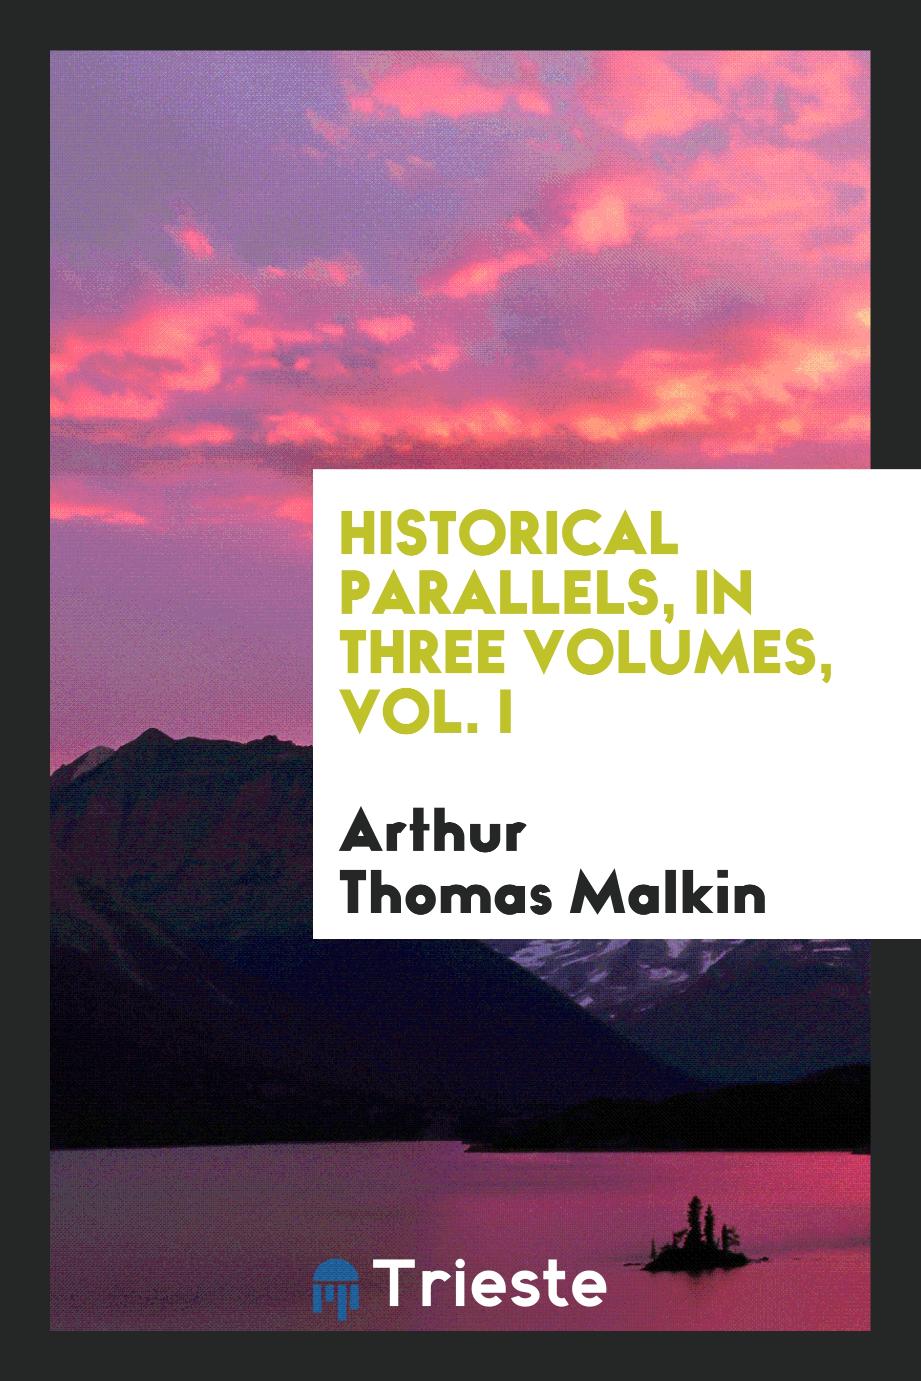 Historical parallels, in three volumes, Vol. I